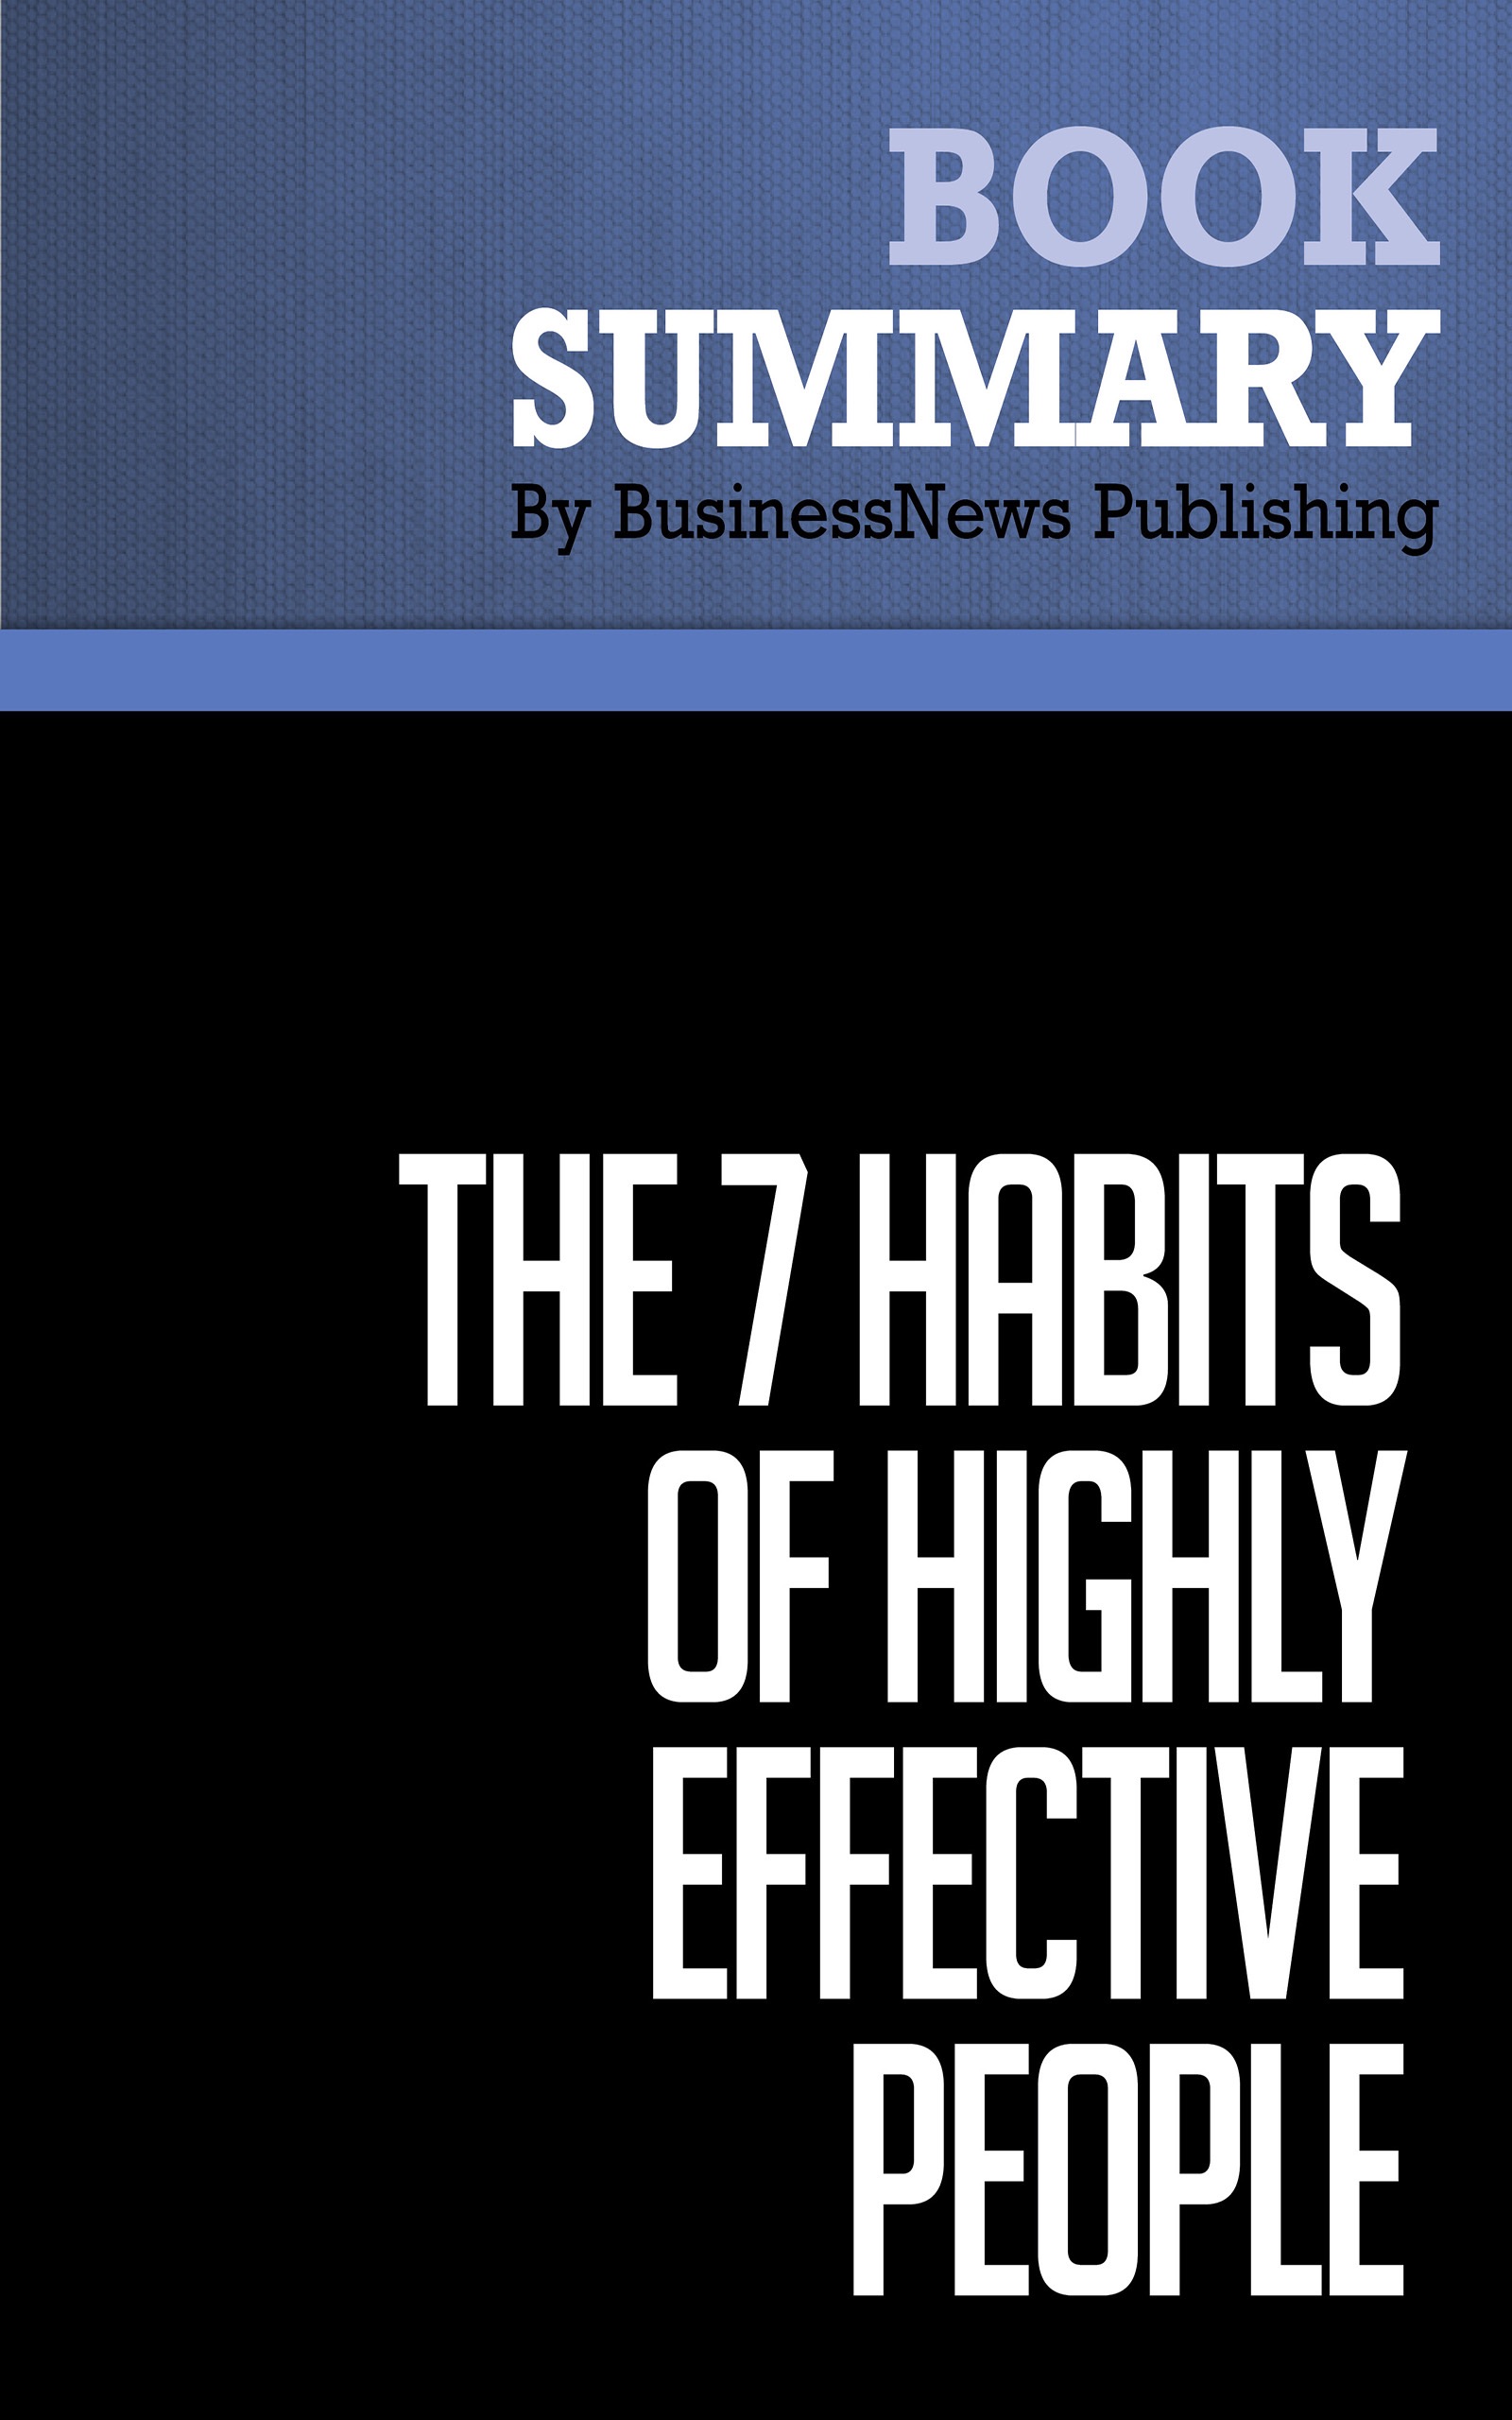 7 habits of highly effective people by stephen r covey